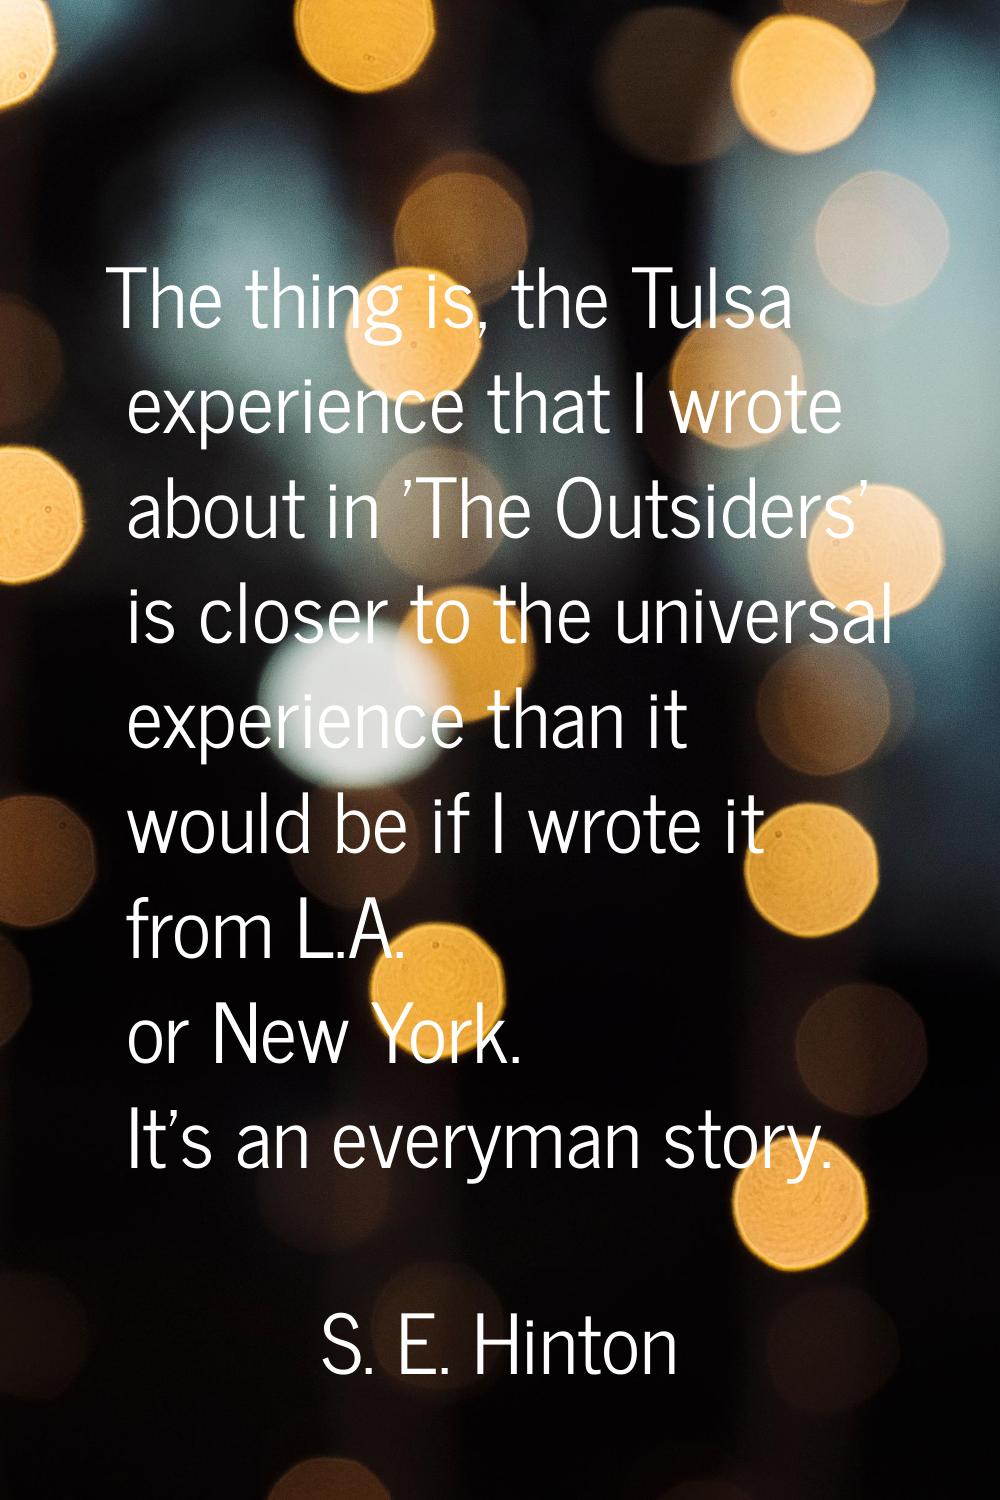 The thing is, the Tulsa experience that I wrote about in 'The Outsiders' is closer to the universal